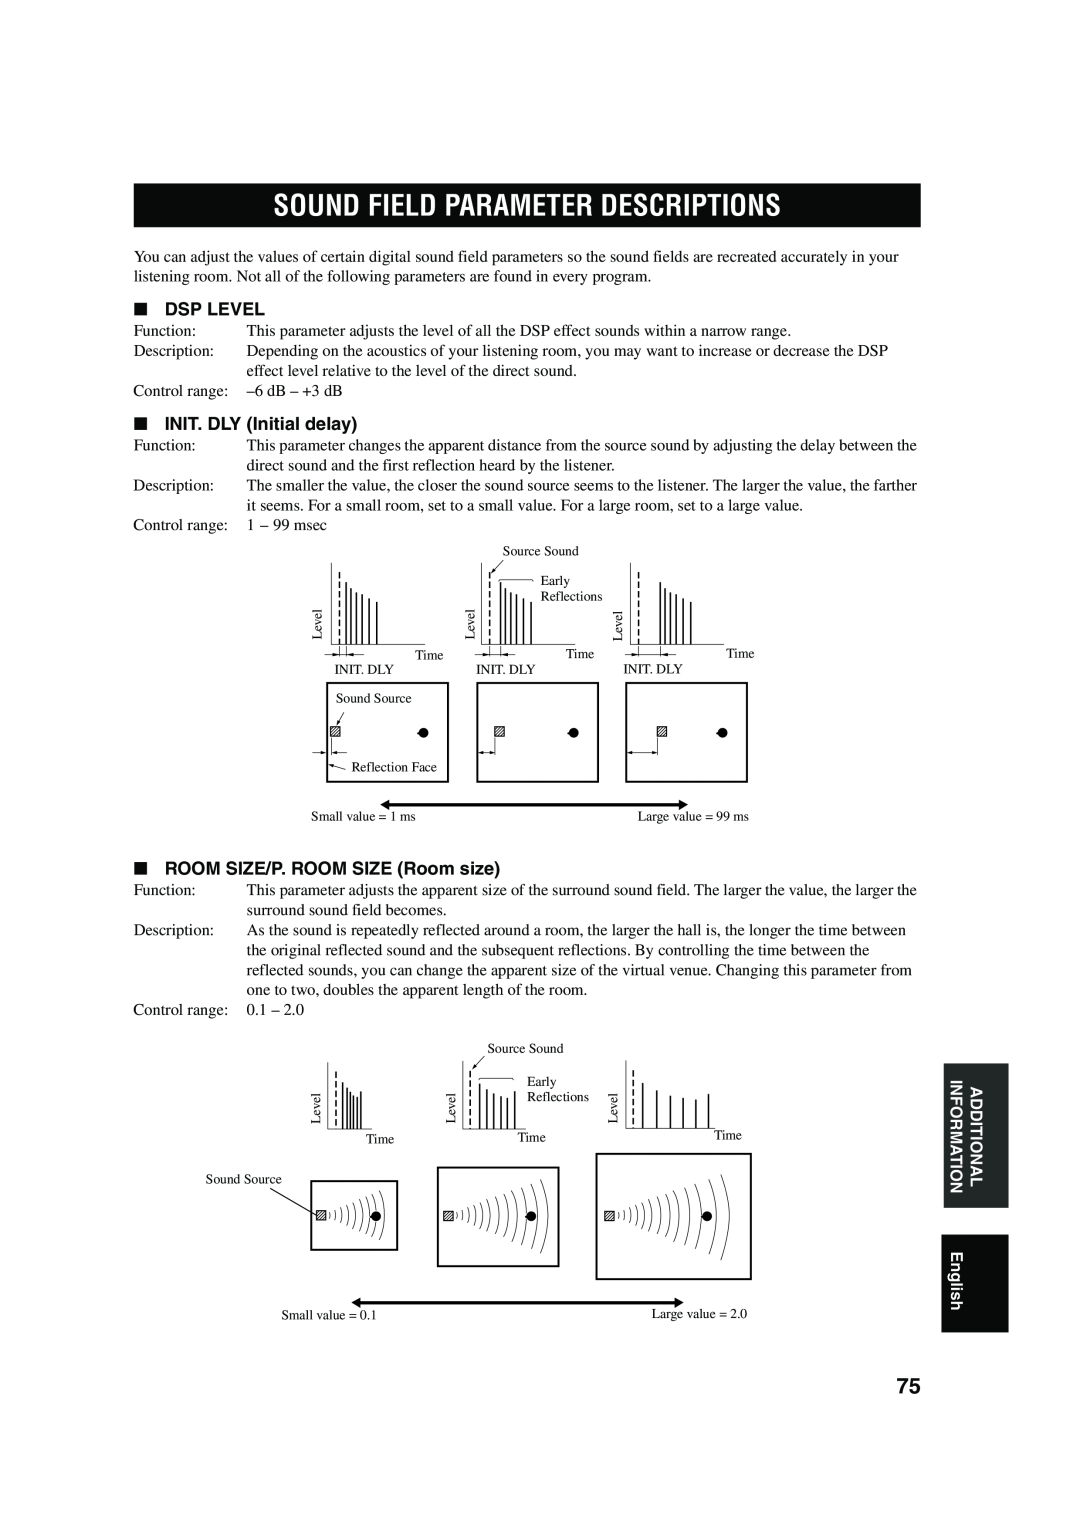 Yamaha DSP-AX750SE owner manual Sound Field Parameter Descriptions, Dsp Level, INIT. DLY Initial delay 